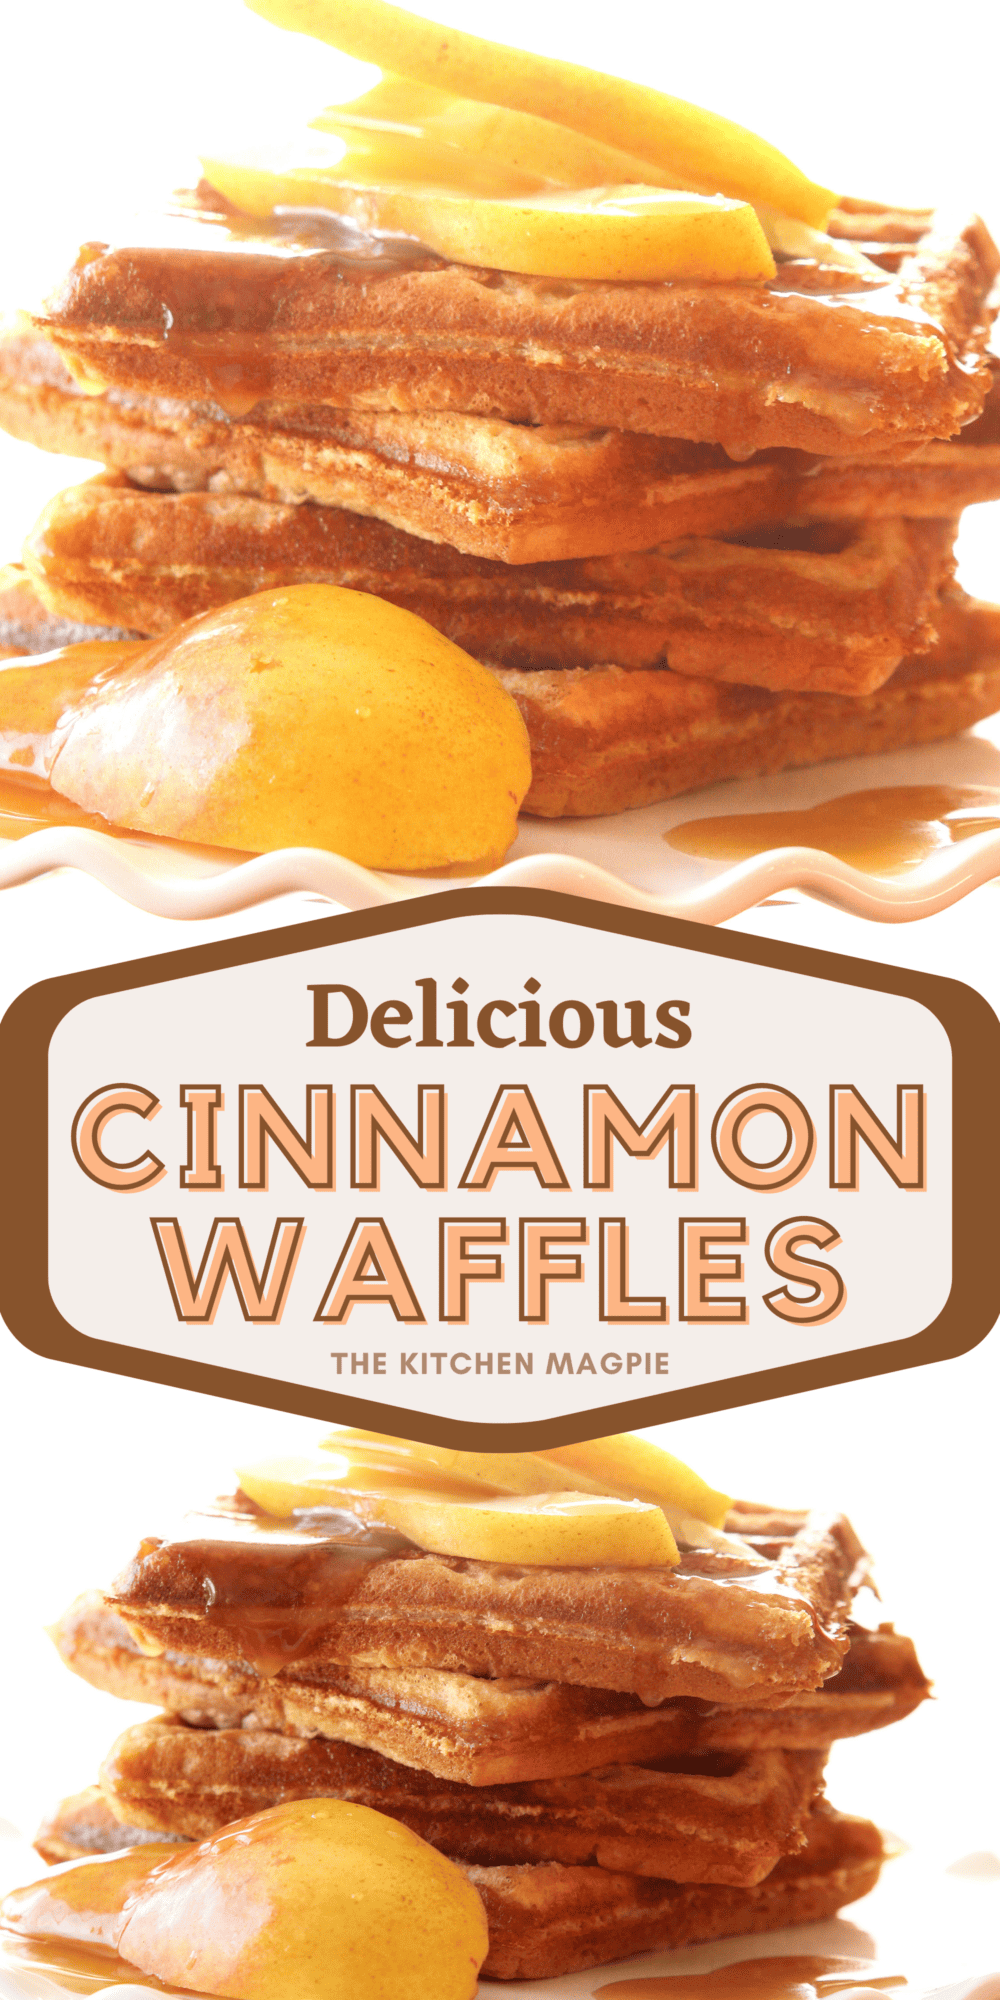 Light and fluffy Belgian style waffles with a hint of cinnamon and a touch of nutmeg.